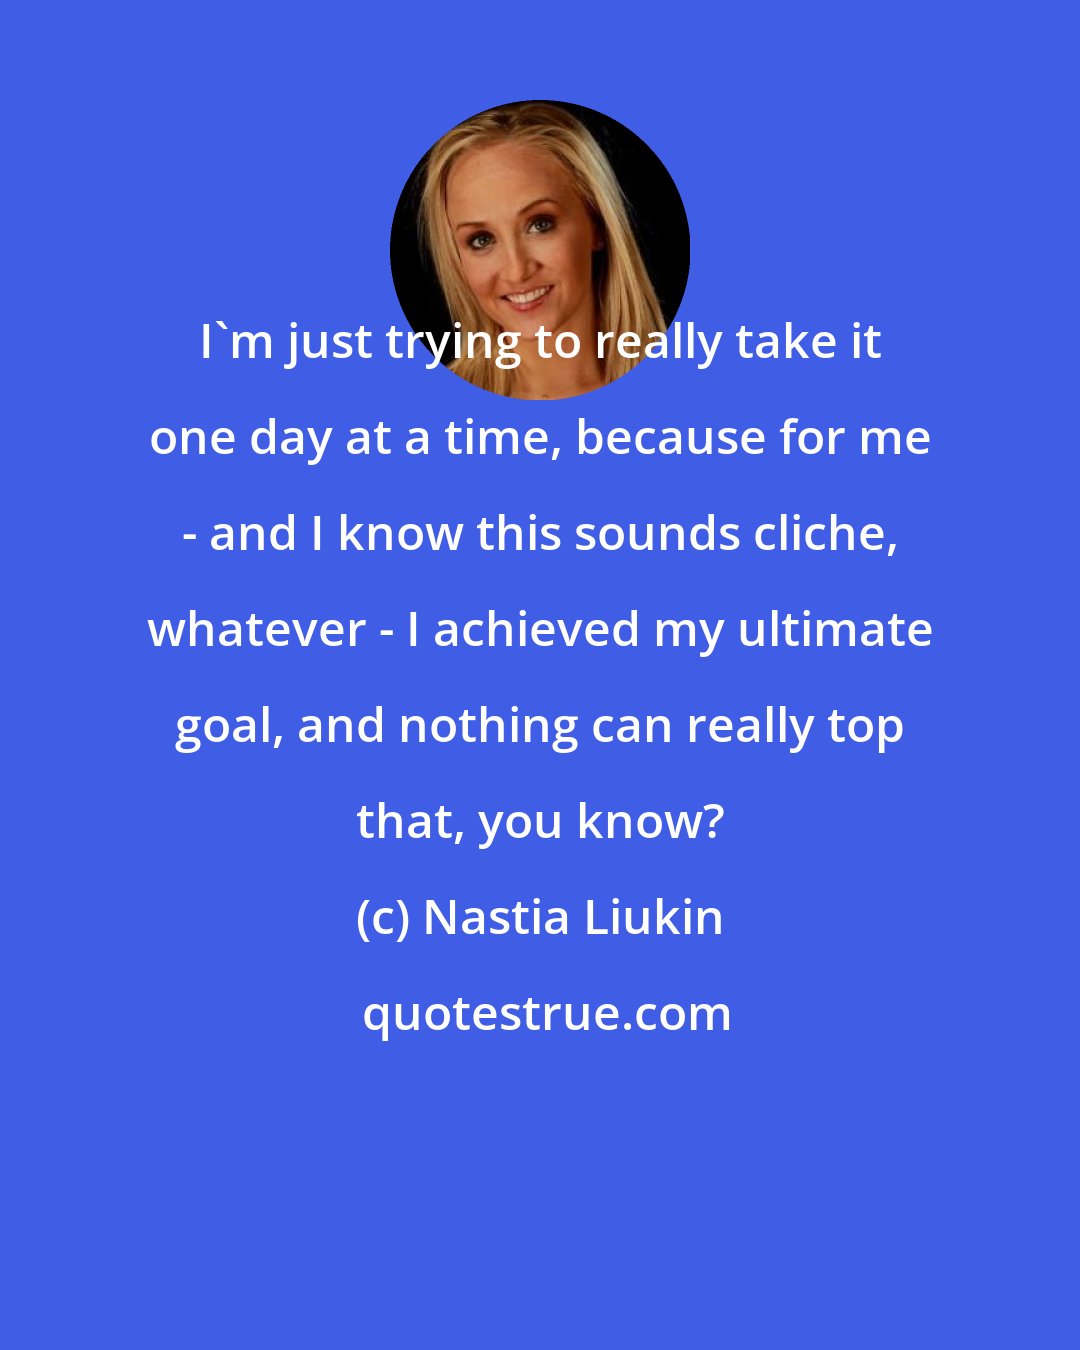 Nastia Liukin: I'm just trying to really take it one day at a time, because for me - and I know this sounds cliche, whatever - I achieved my ultimate goal, and nothing can really top that, you know?